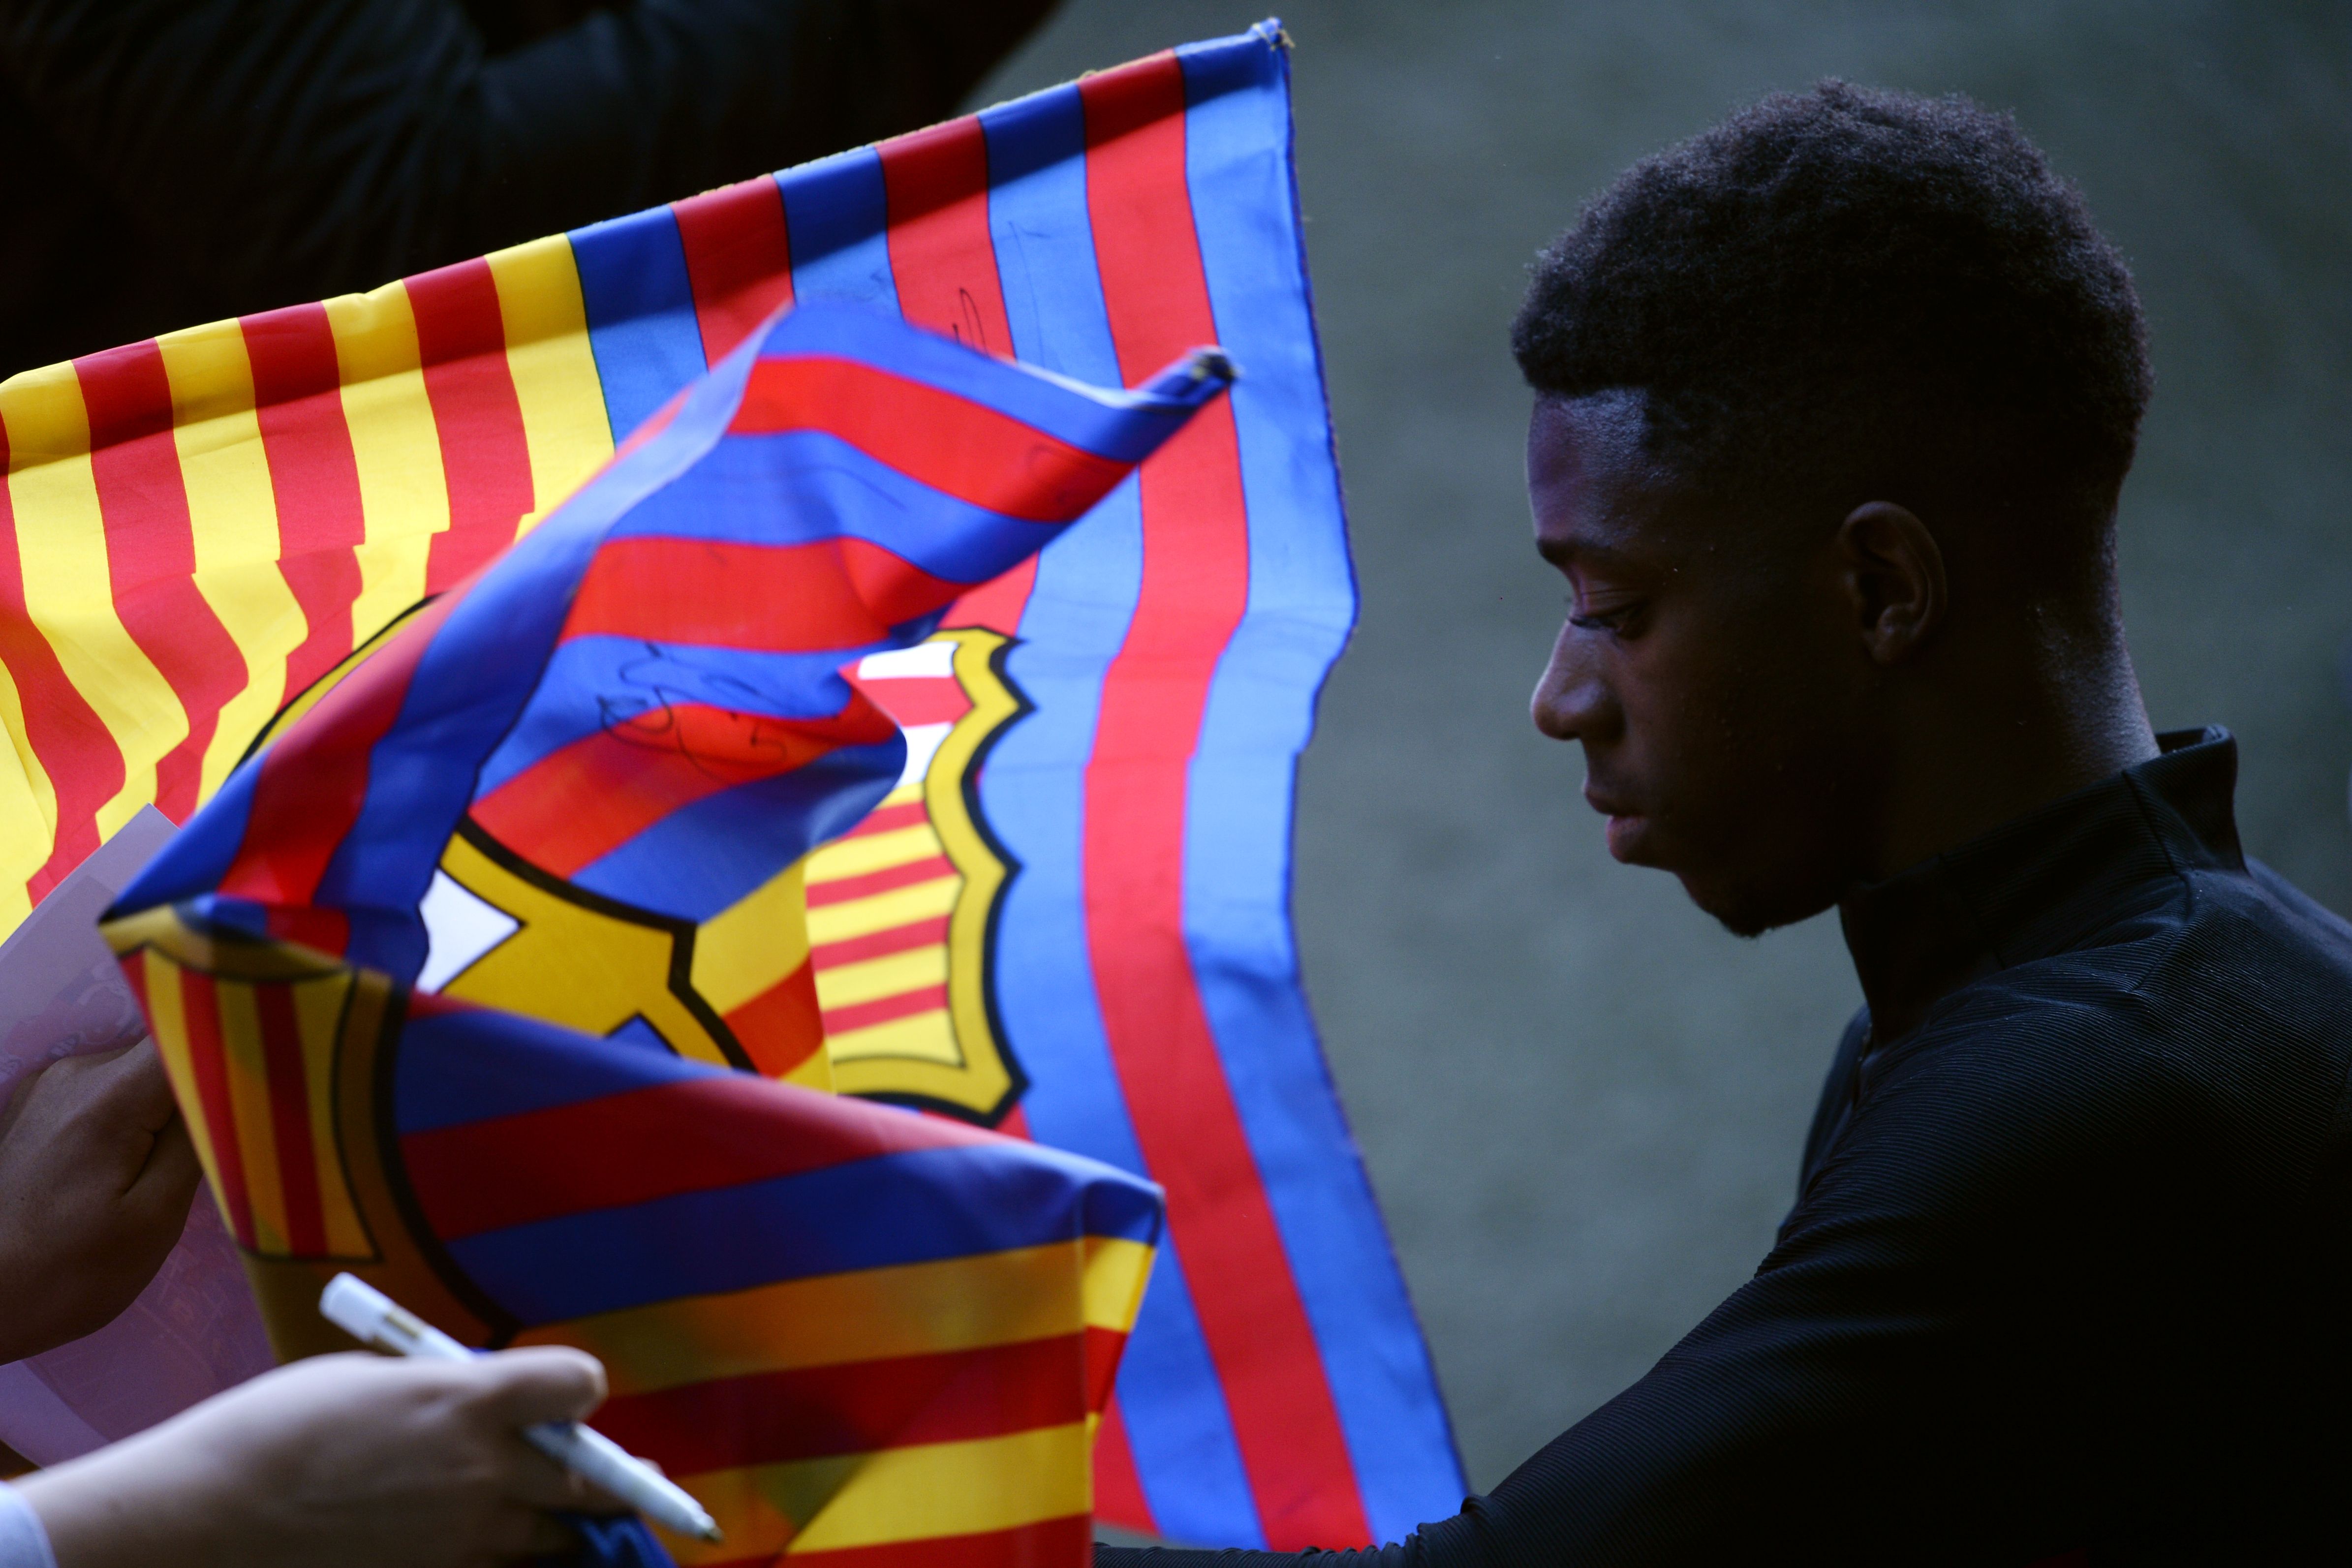 Barcelona's French forward Ousmane Dembele signs autographs for supporters at the end of a training session in Barcelona on January 5, 2018. / AFP PHOTO / Josep LAGO        (Photo credit should read JOSEP LAGO/AFP/Getty Images)